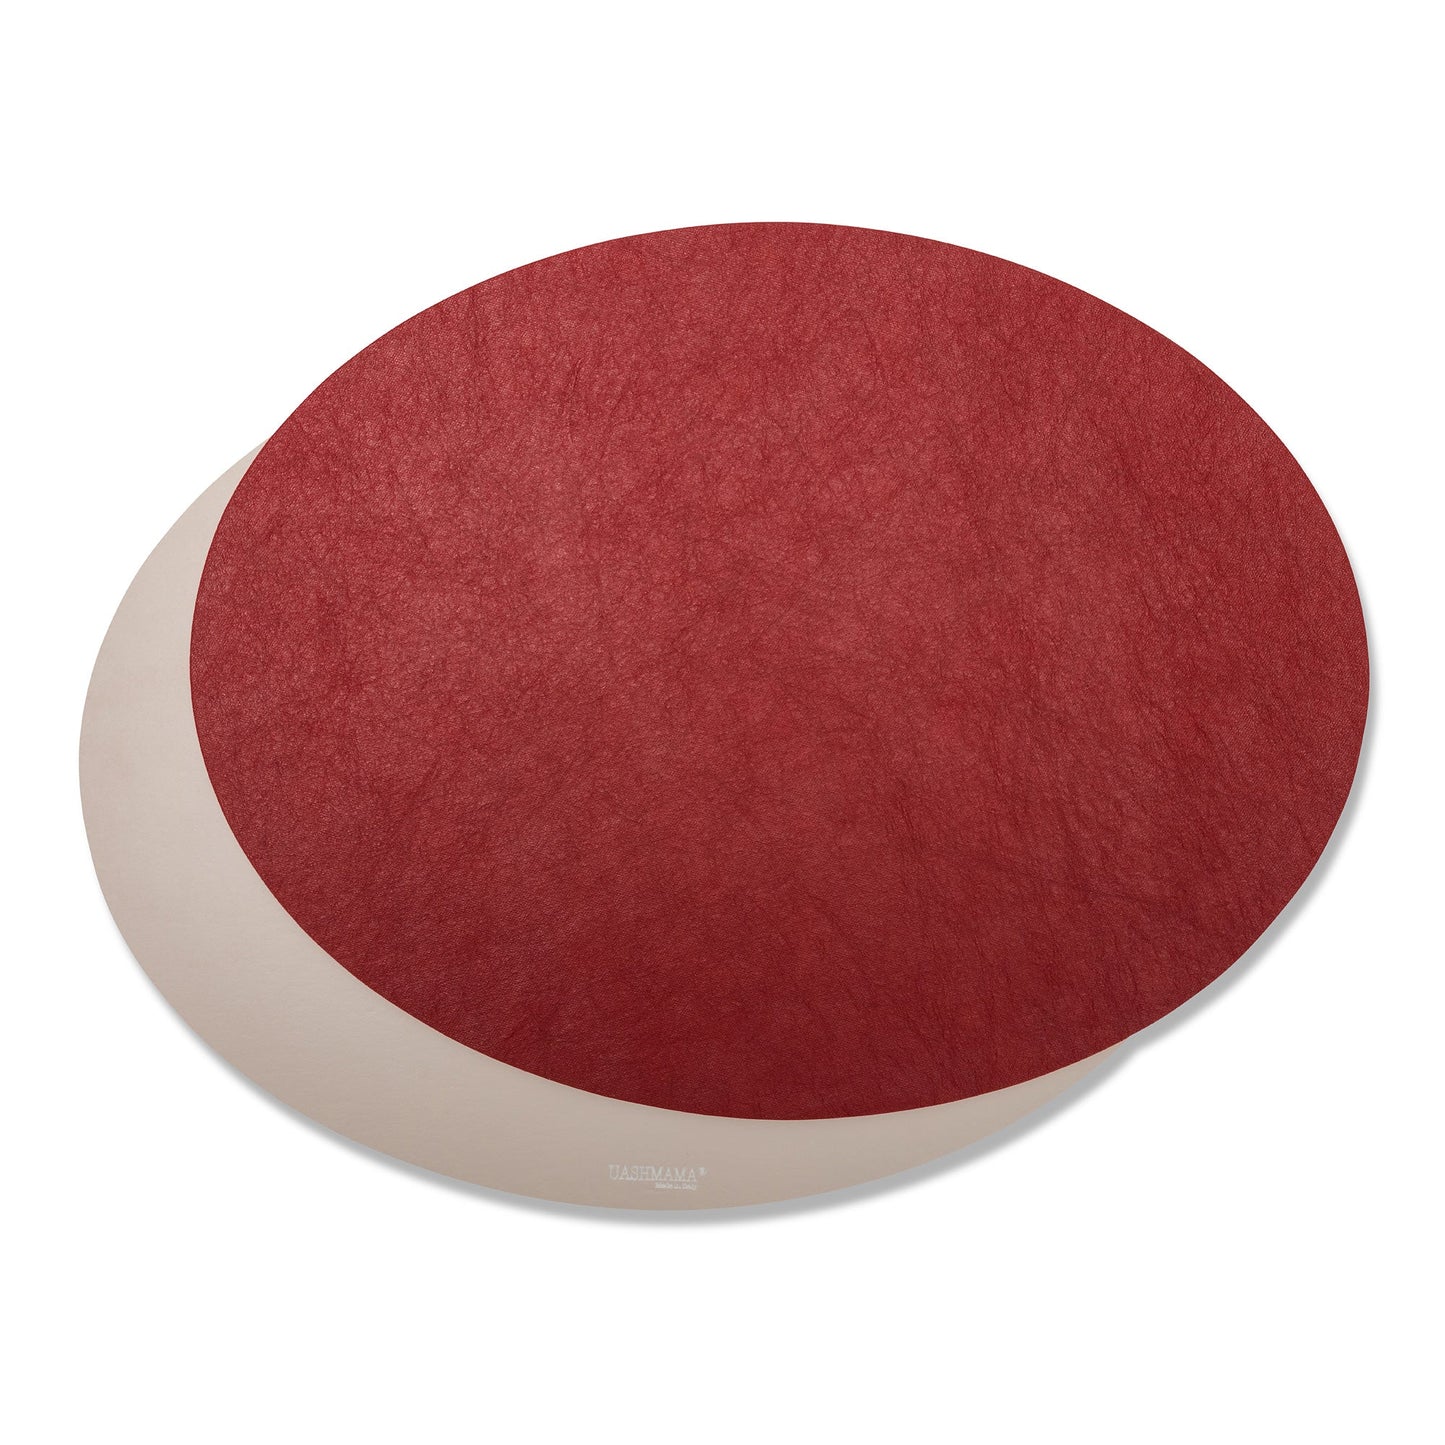 Two oval washable paper placemats are shown on top of each other. The one in the rear is beige and the one on top is red.